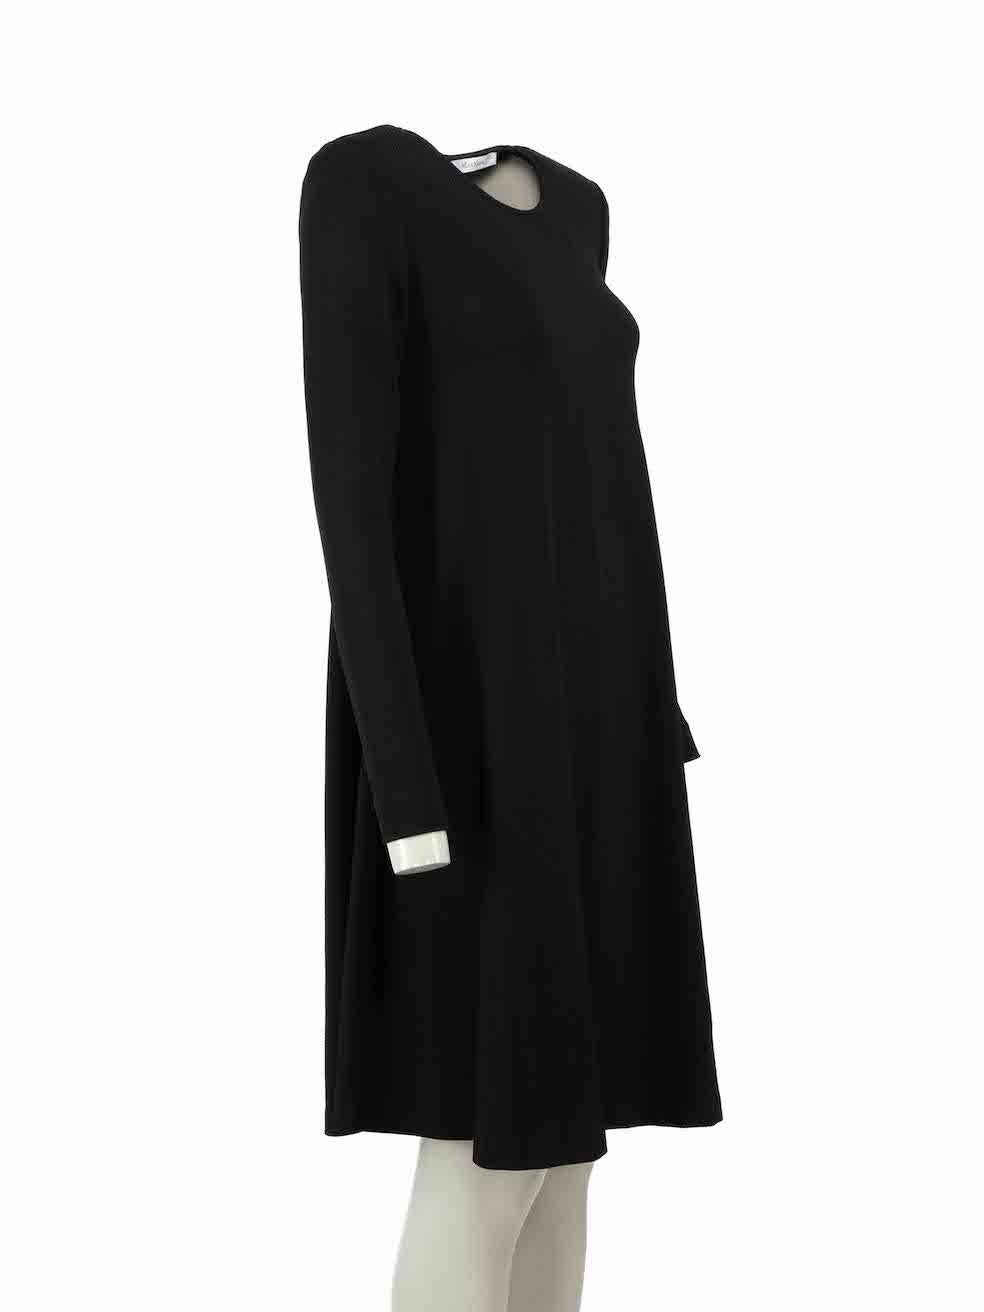 CONDITION is Very good. Minimal wear to dress is evident. Minimal wear to both underarms with light marks to the lining on this used Max Mara designer resale item.
 
Details
Black
Viscose
Dress
Long sleeves
Knee length
Round neck
Shoulder pads
Back